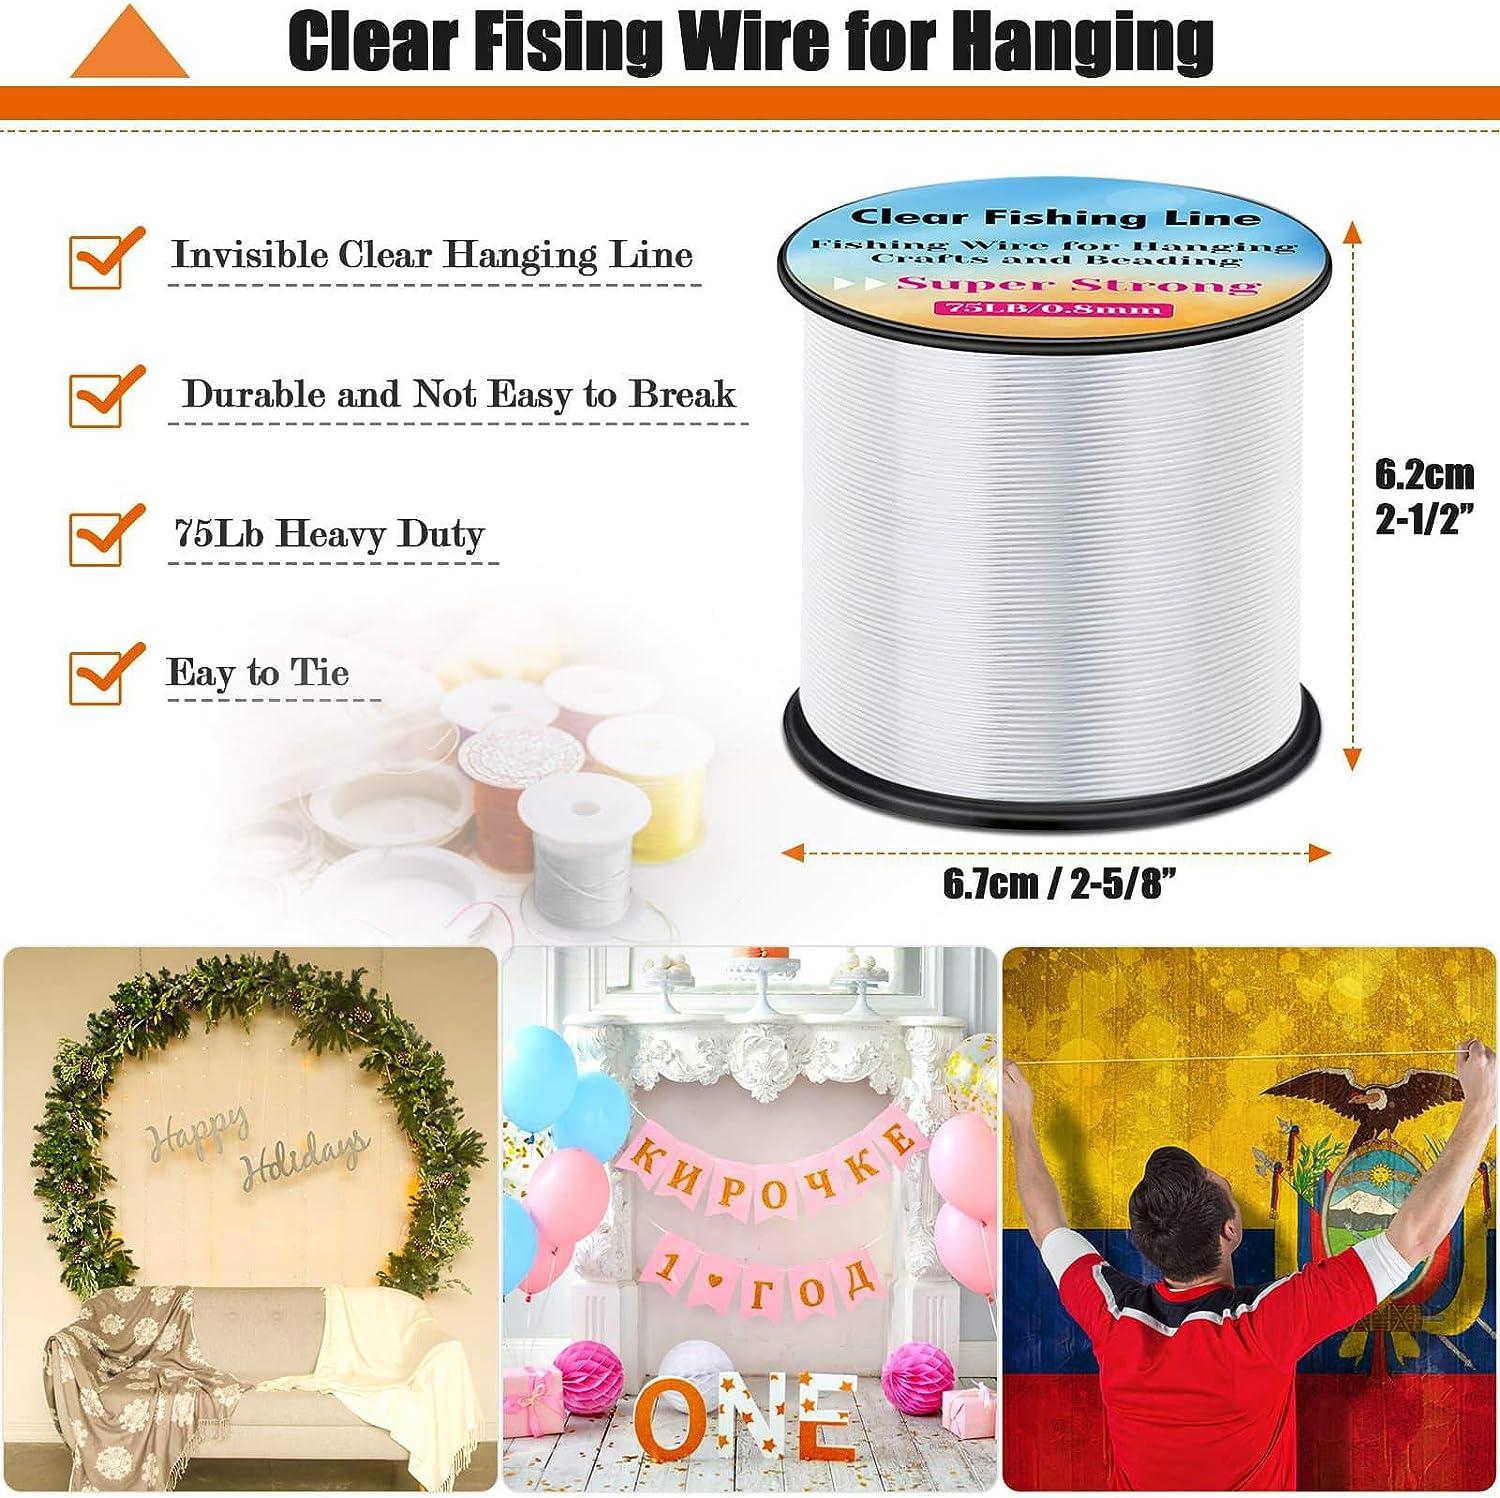 Clear Fishing Wire, Acejoz 656FT Fishing Line Clear Bahrain